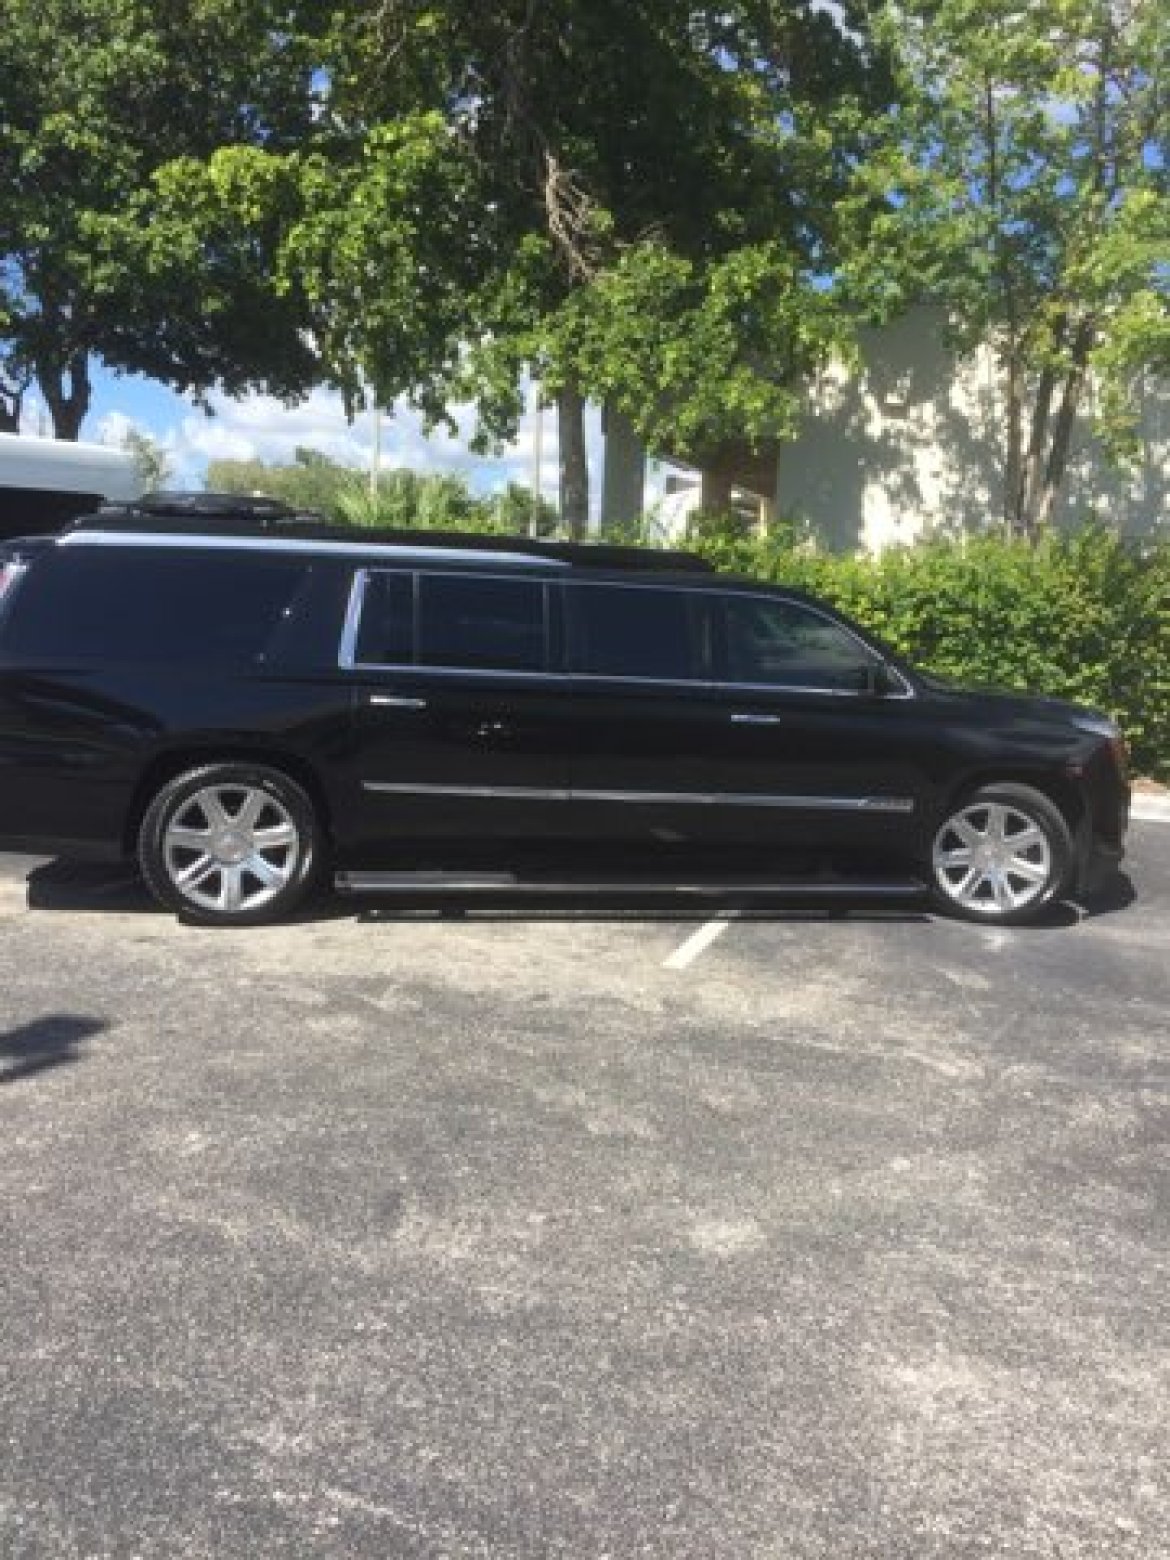 CEO SUV Mobile Office for sale: 2015 Cadillac Escalade Esv Ceo 30&quot; by Executive